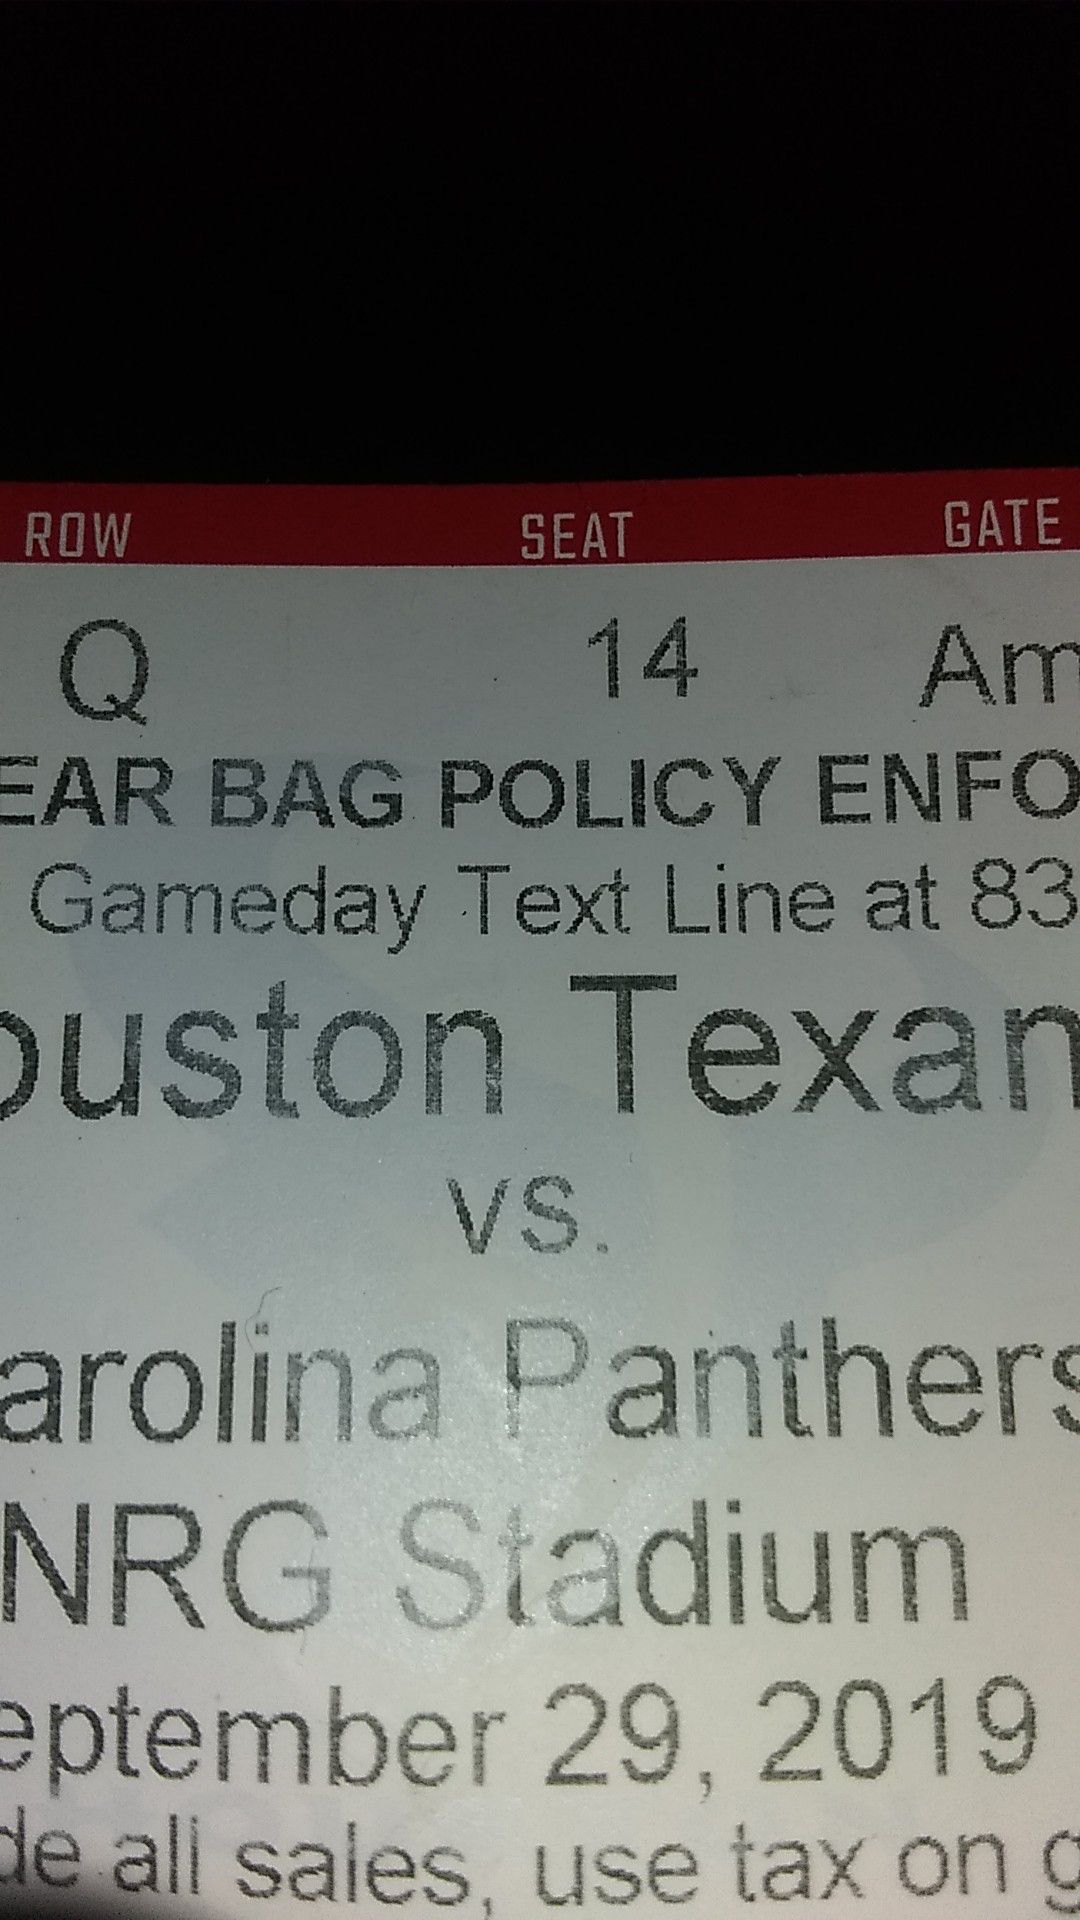 HOUSTON TEXANS TICKETS Good deal 150$for two seats verifiably valid